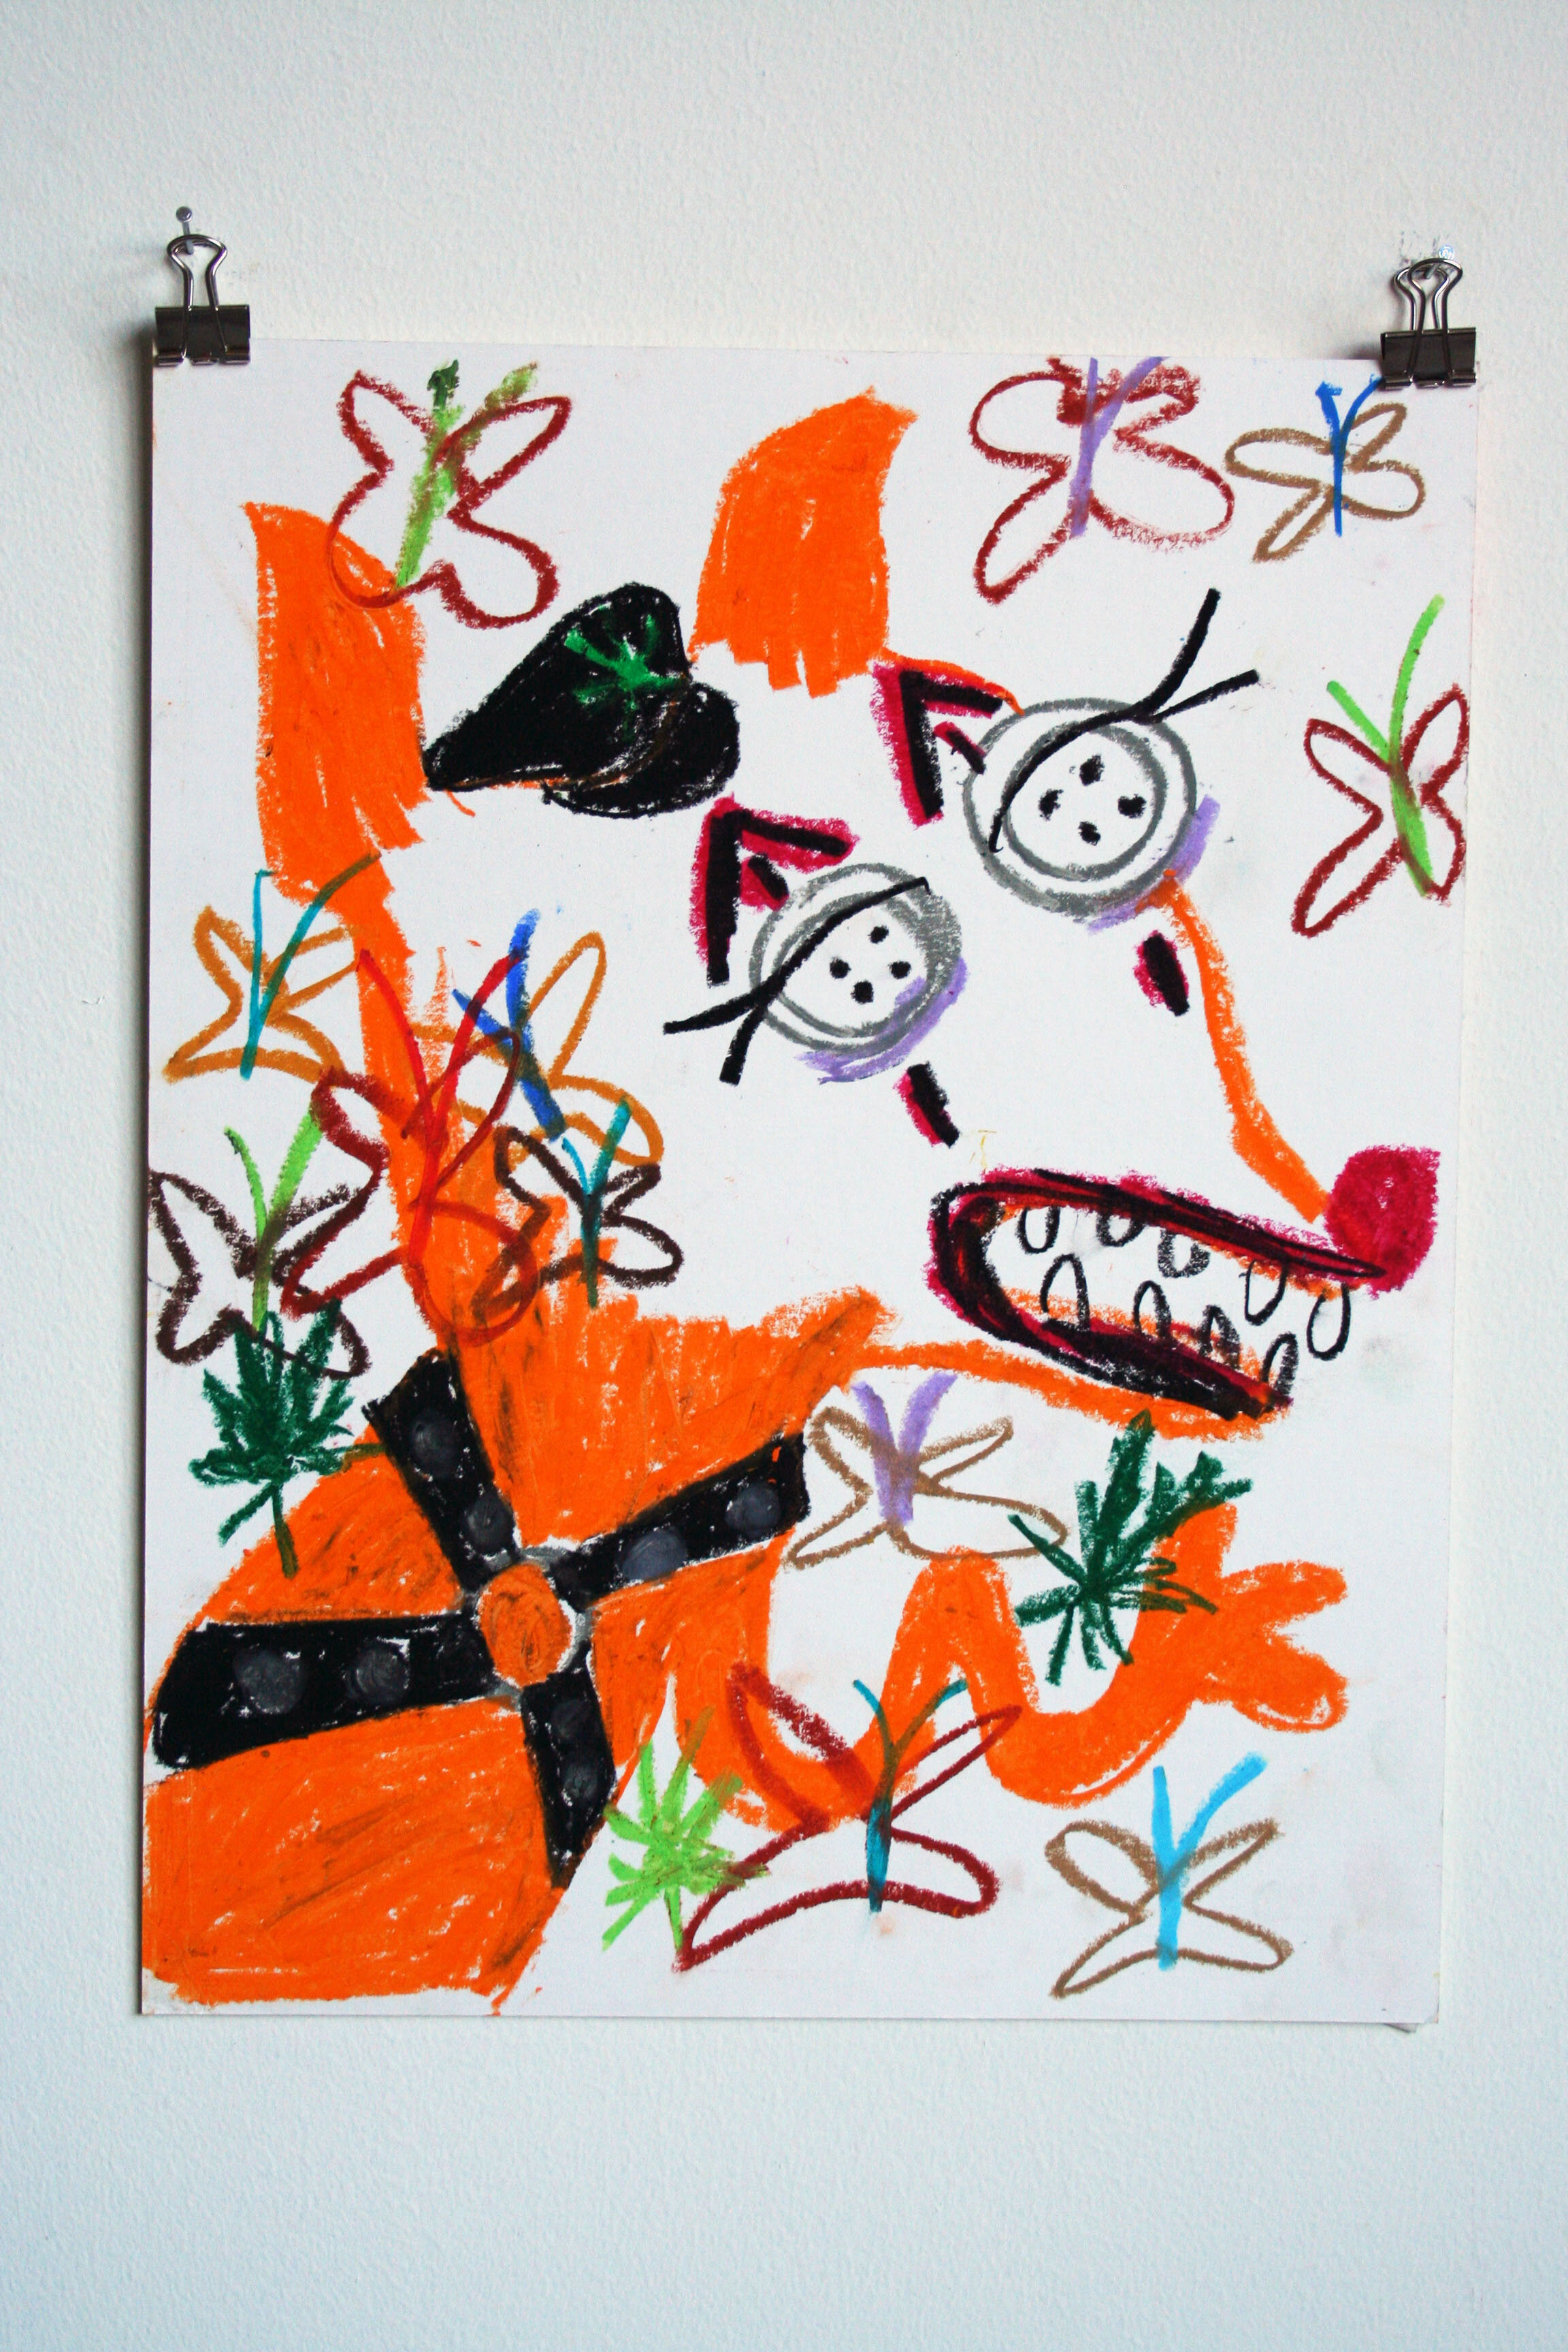   Button Eyes,  2013  14 x 11 inches (35.56 x 27.94 cm.)  Oil Pastel on paper 